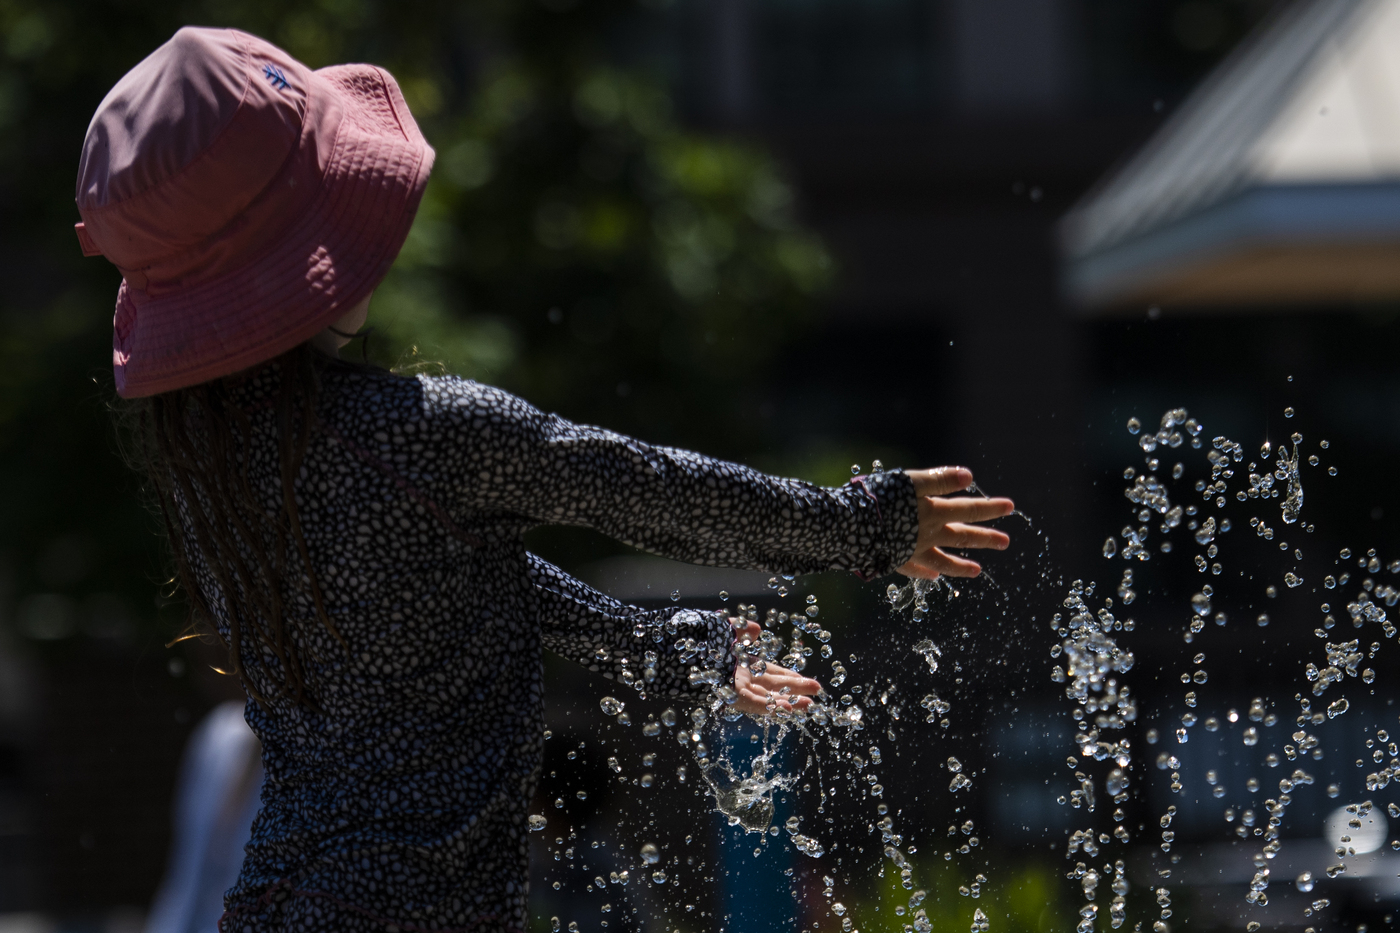 person wearing pink bucket hat playing in a sprinkler